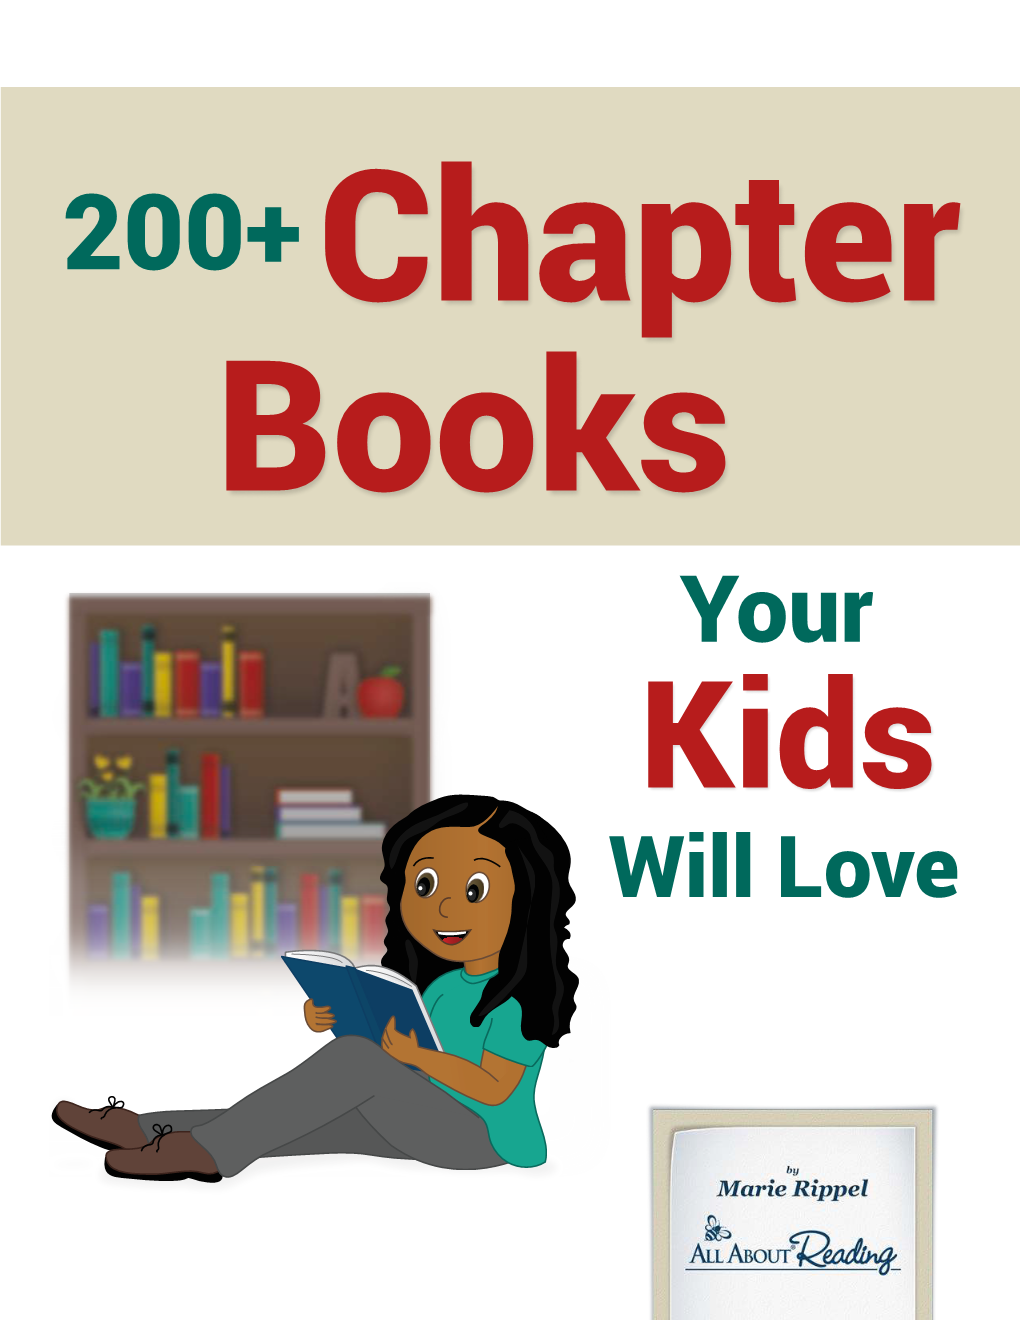 Will Love 200+ Chapter Books Your Kids Will Love